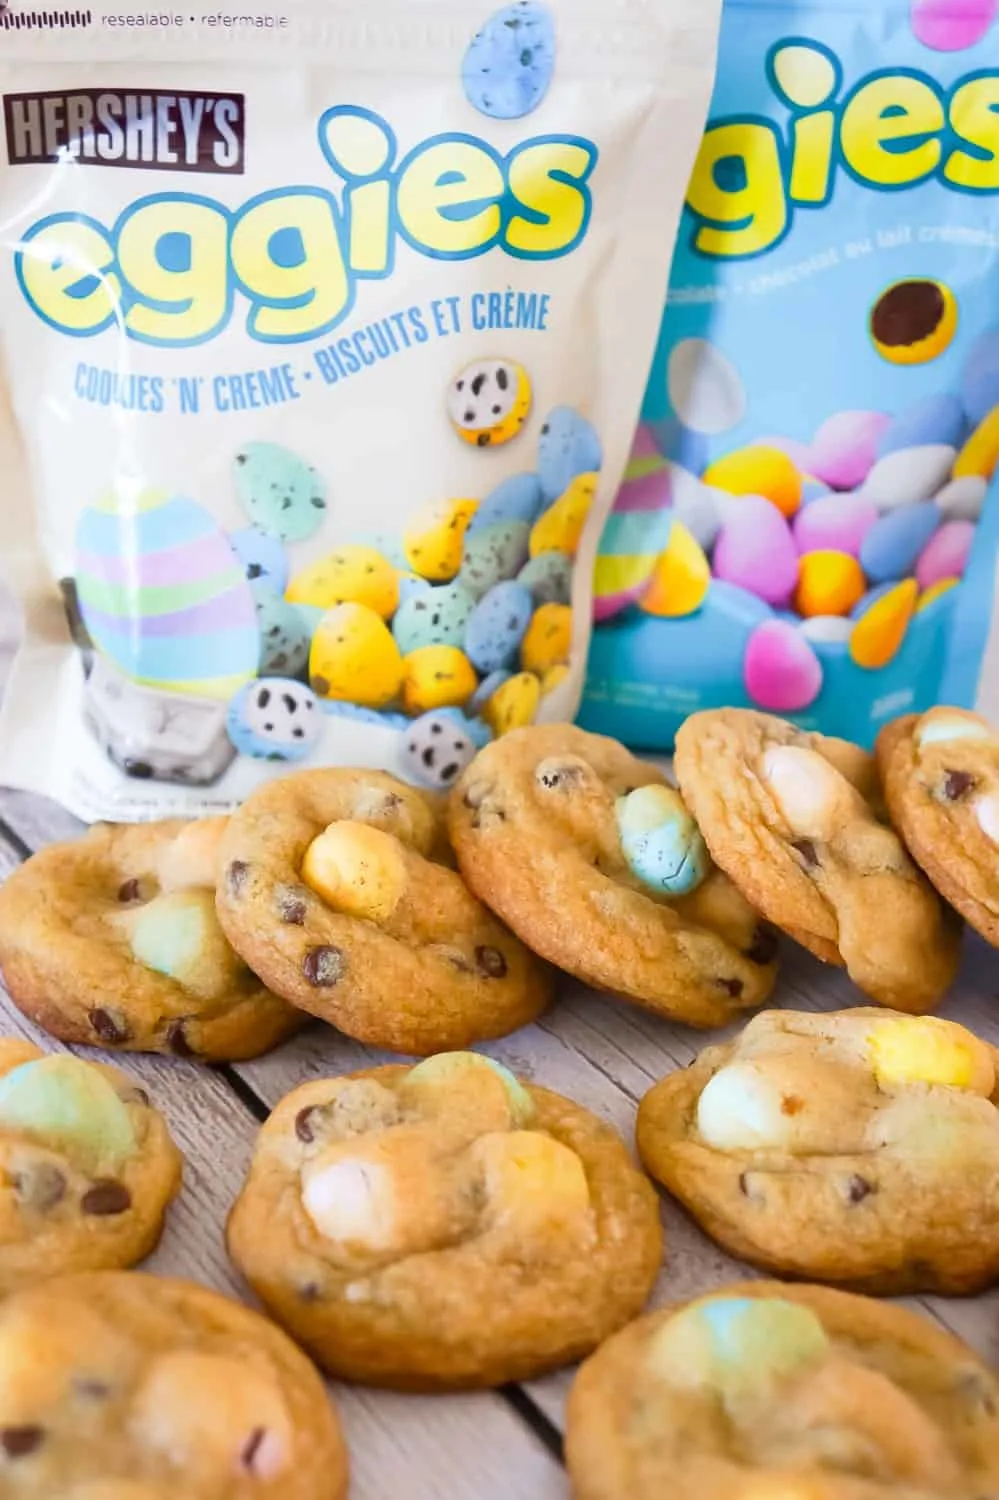 Easter Cookies are delicious chocolate chip cookies loaded with milk chocolate and cookies and cream Hershey's Eggies. These chewy chocolate chip cookies with mini eggs are made with butter flavoured Crisco.